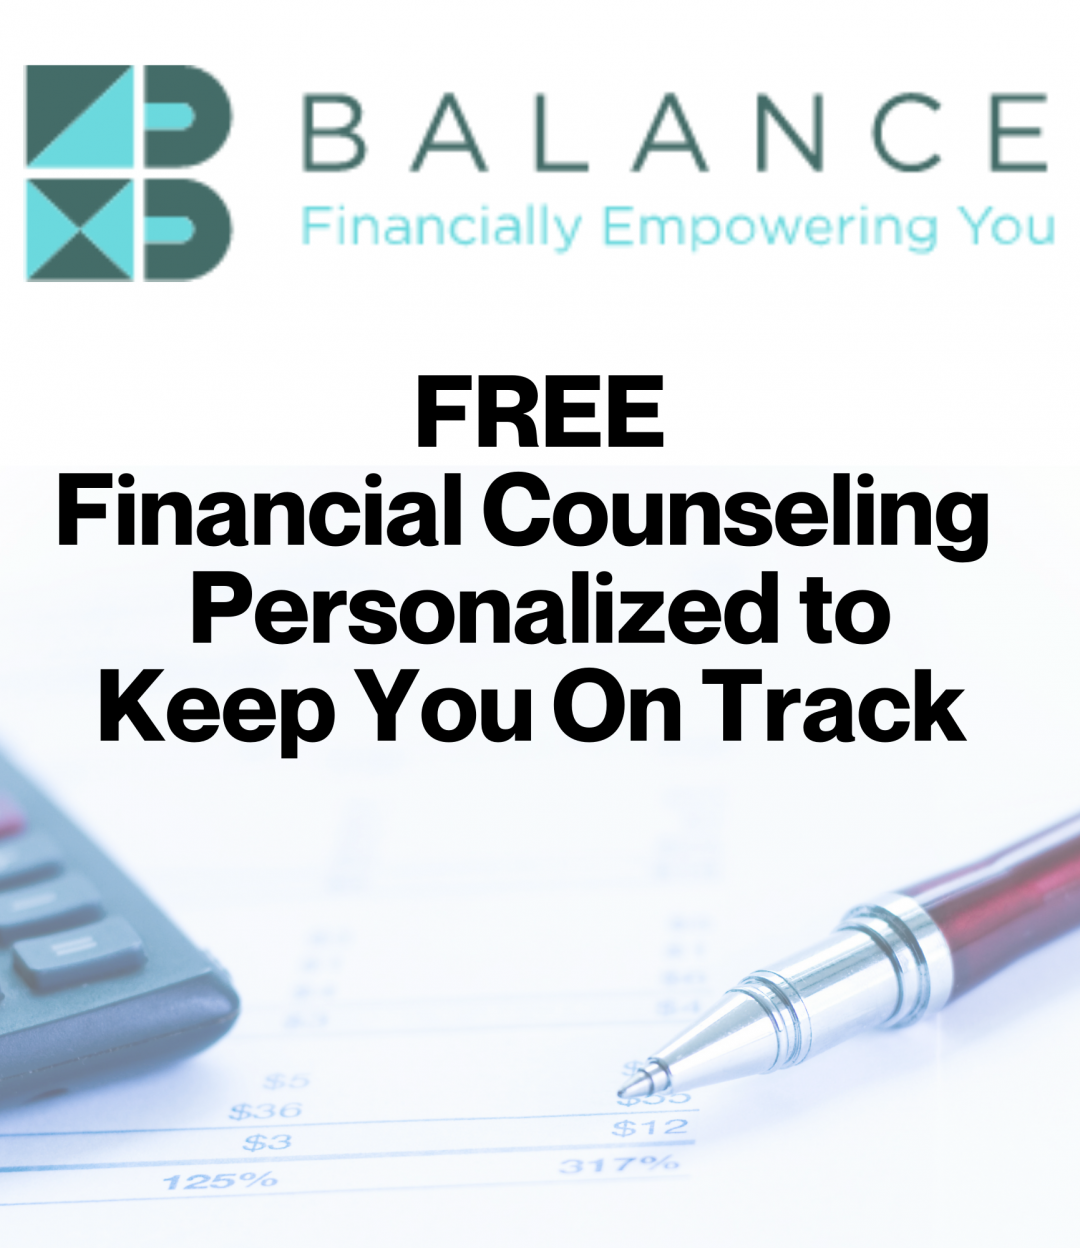 Financial Counseling for FREE Personalized to Keep You on Track Click Here to Get Started